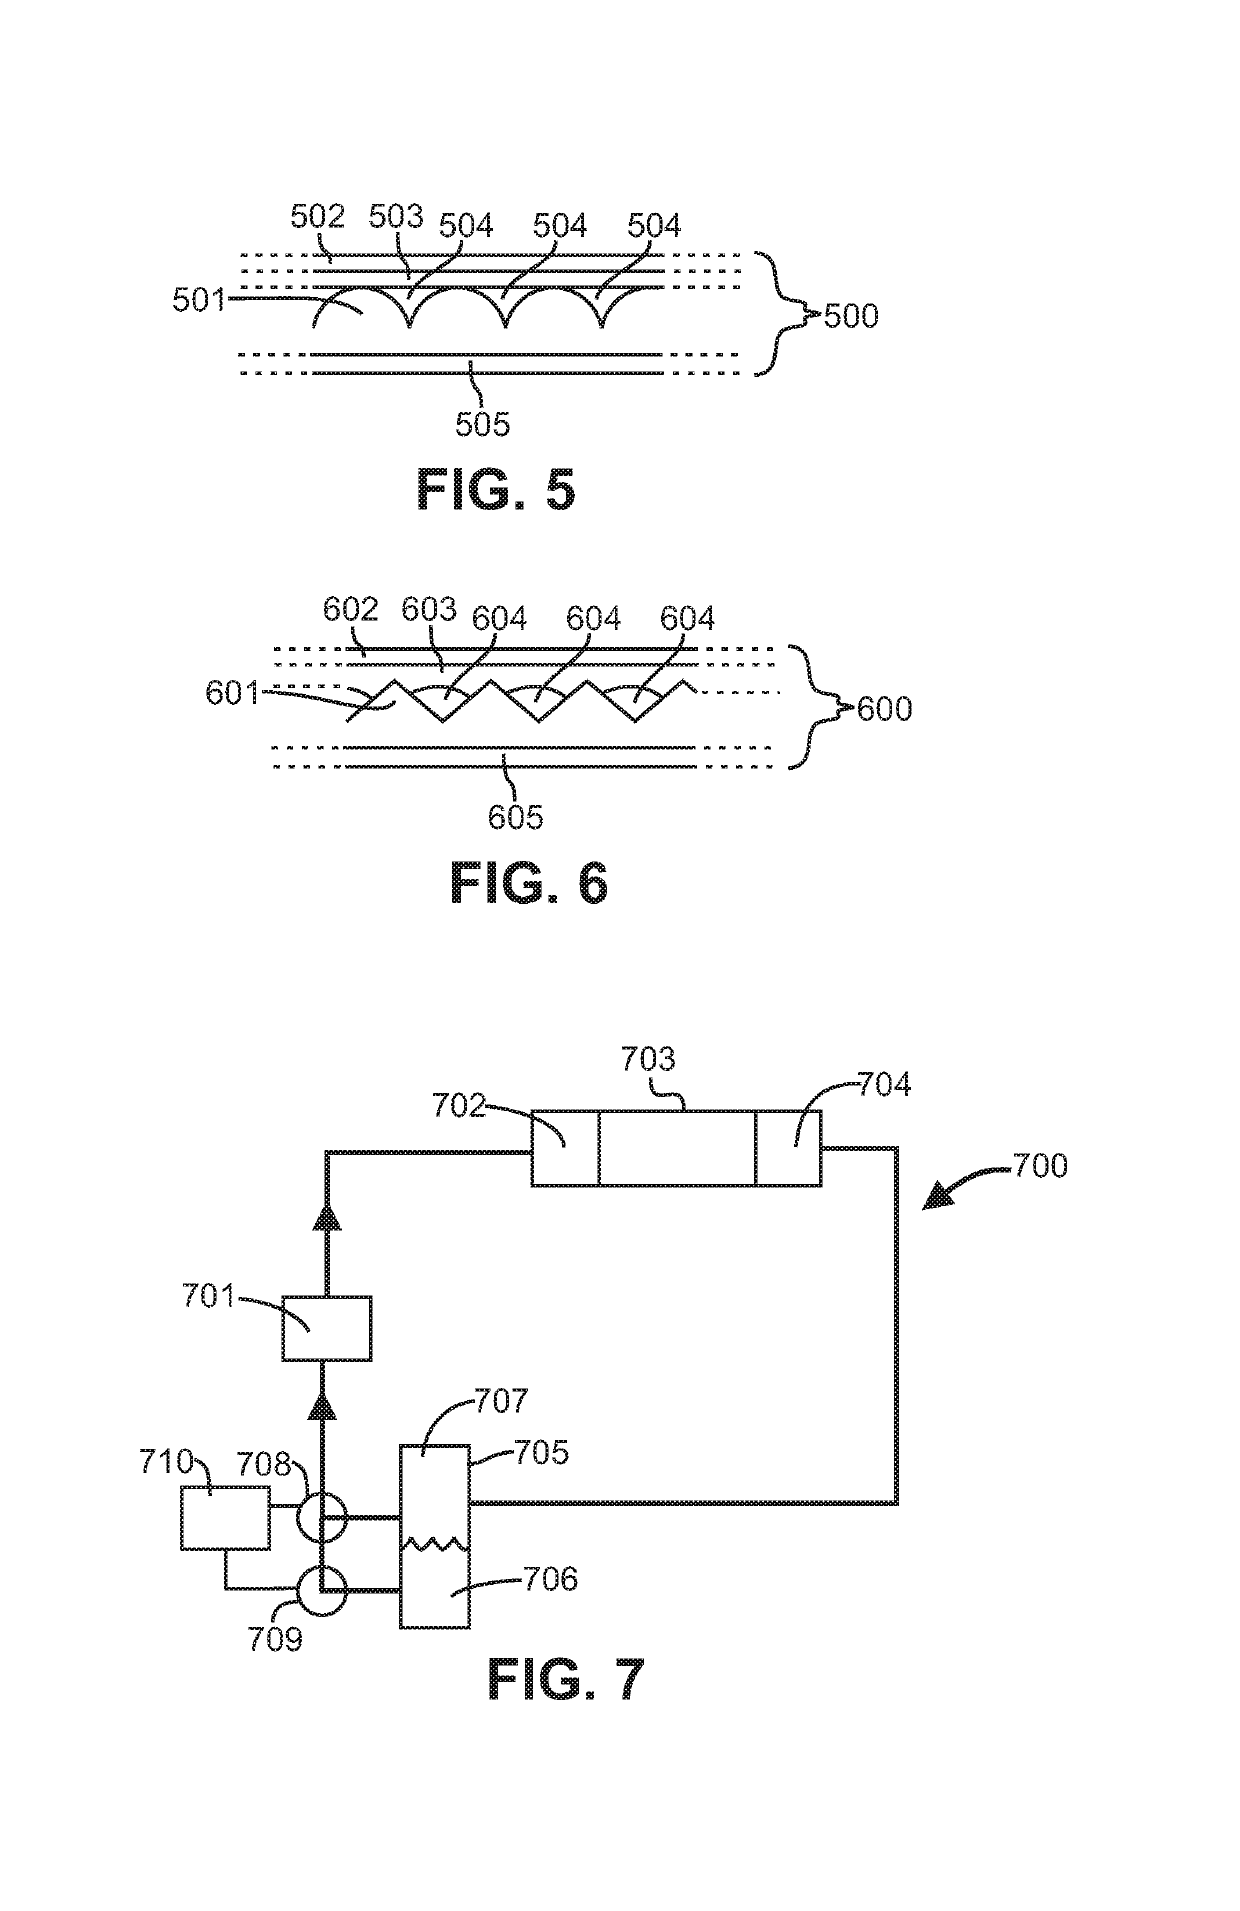 Fluid collection component comprising a film with fluid channels